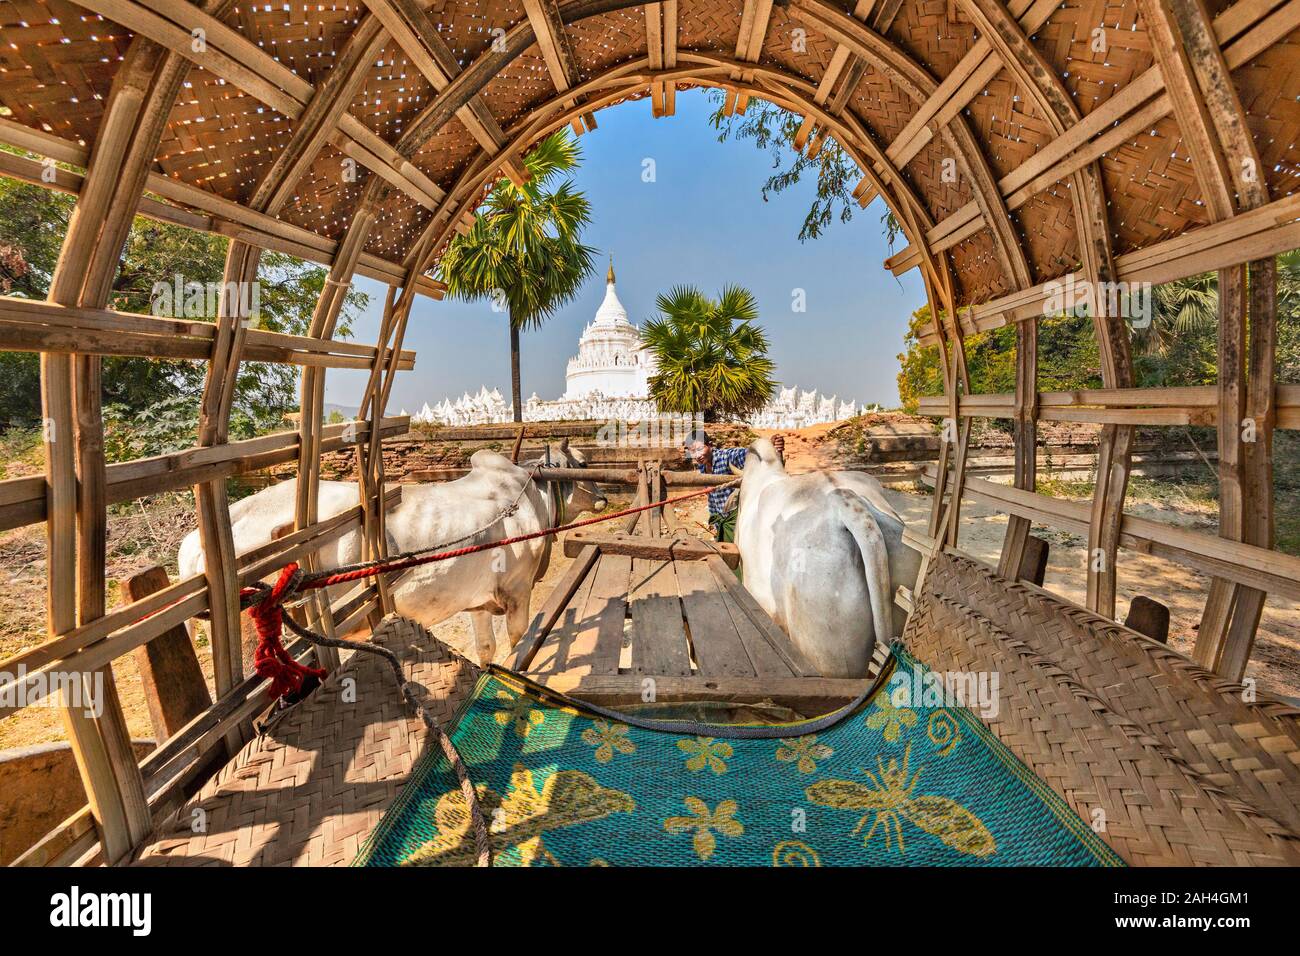 White pagoda known as Hsinbyume, located near Mingun, through the cover of ox cart, in Mandalay, Myanmar. Stock Photo